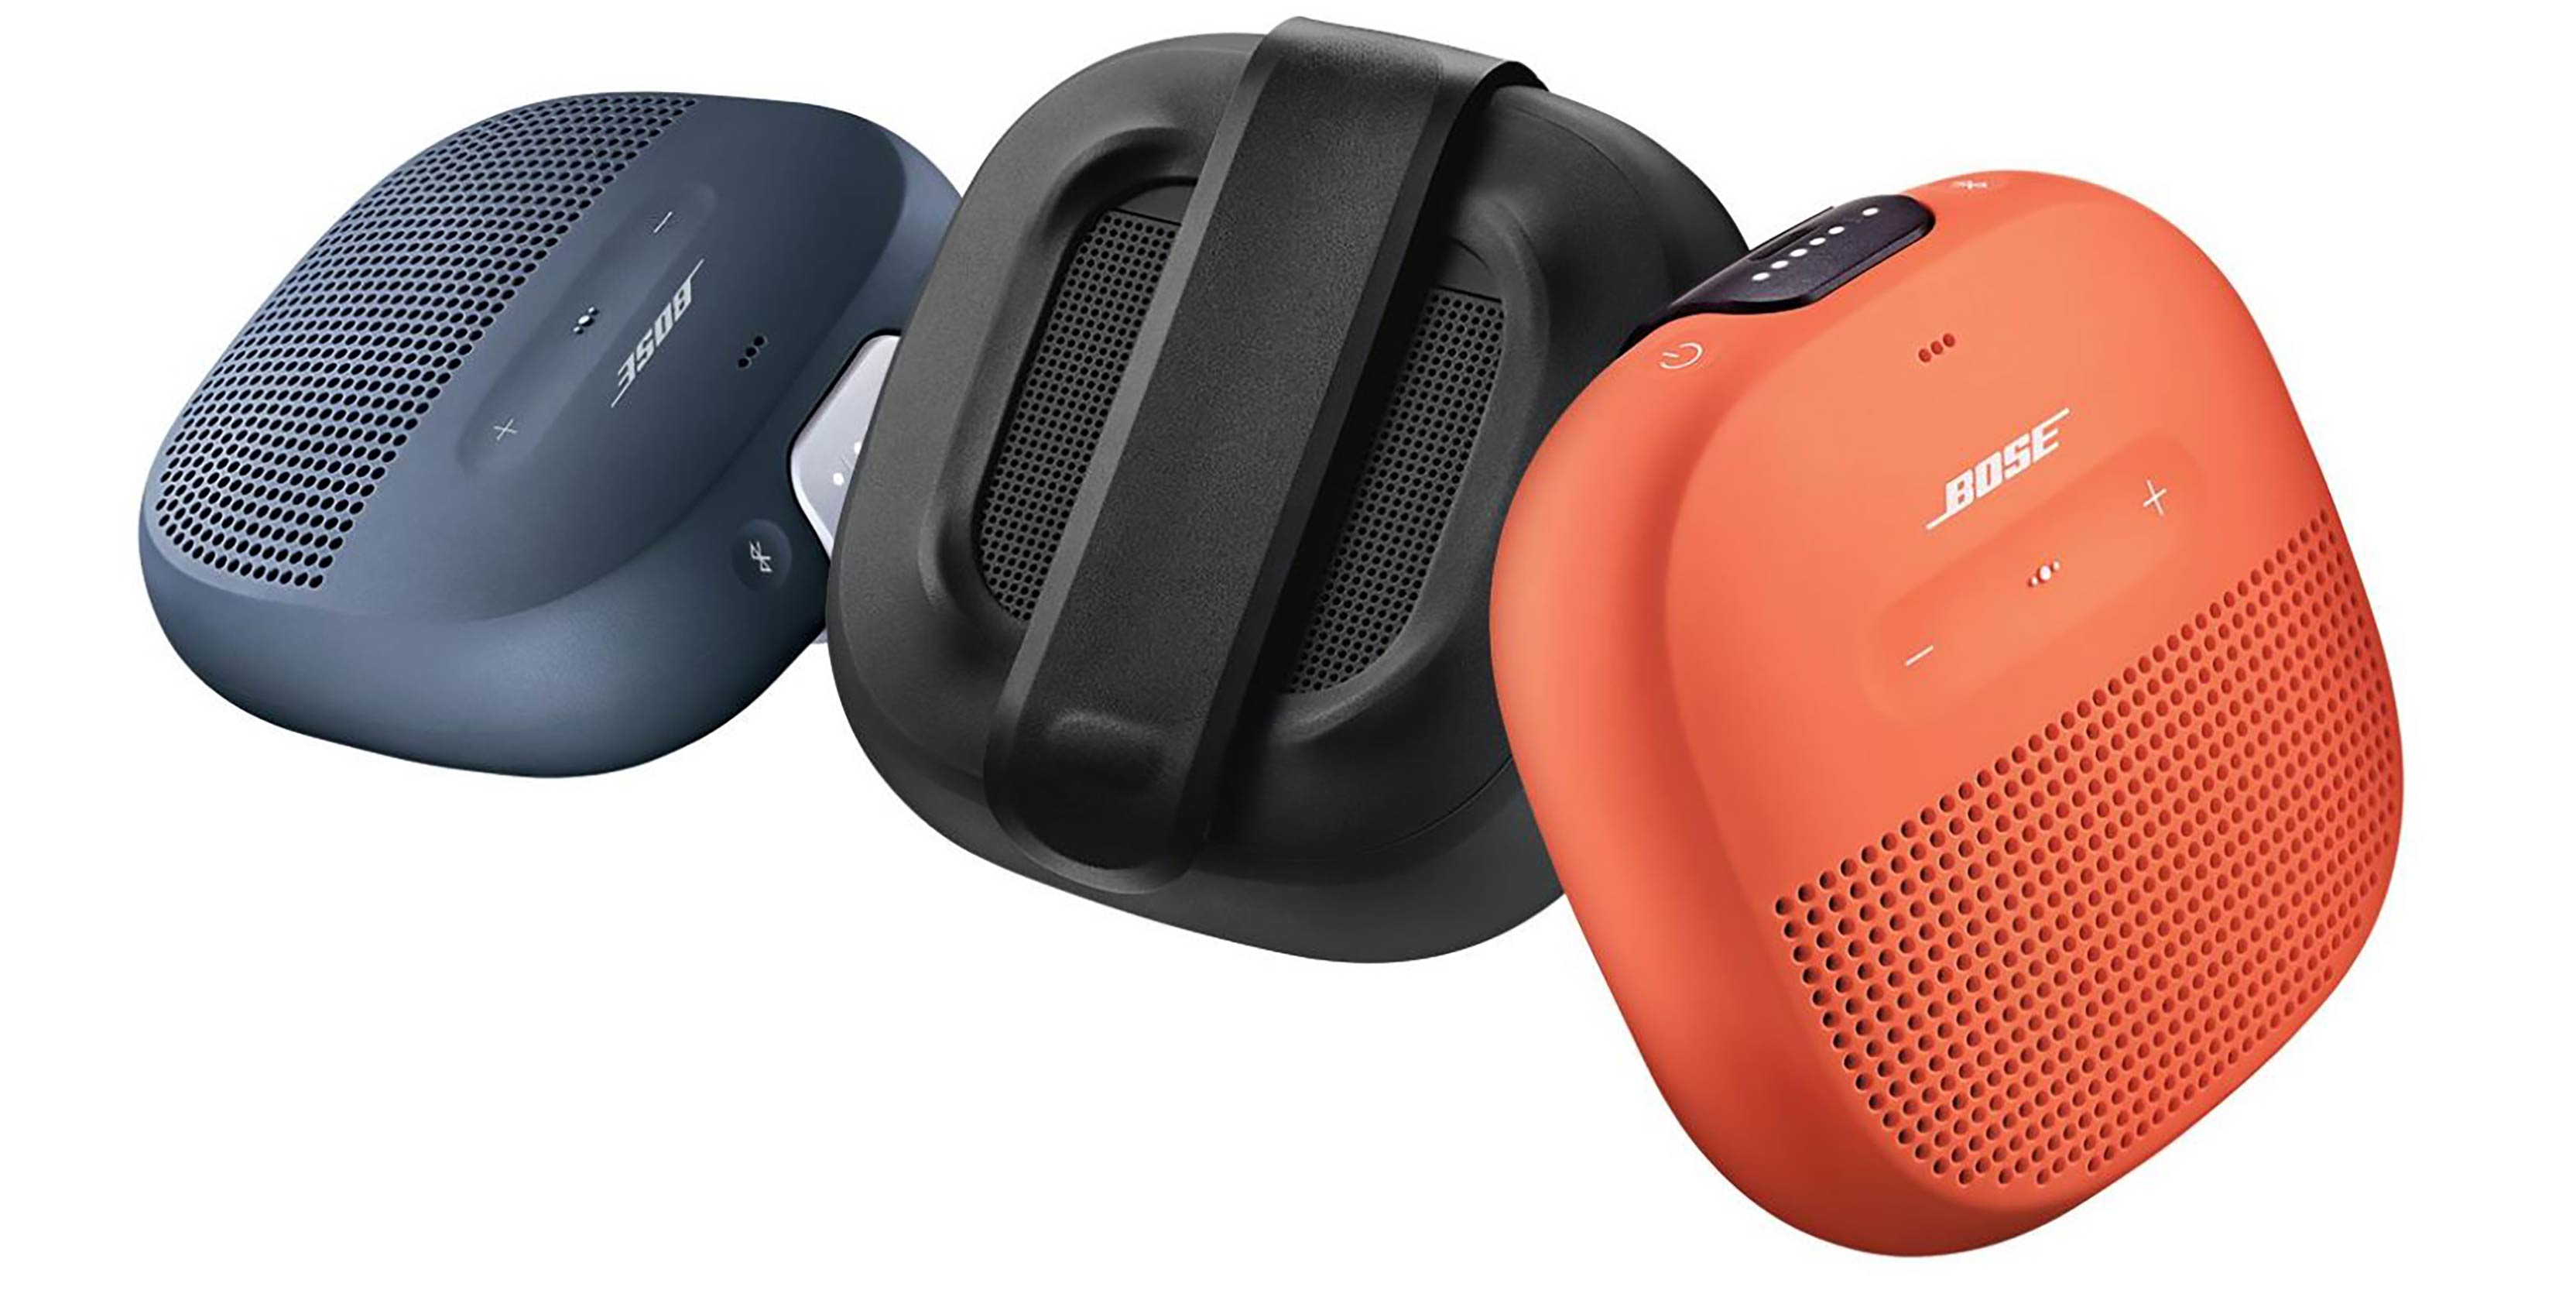 soundlink micro bluetooth speakers in three colours, black, blue and orange